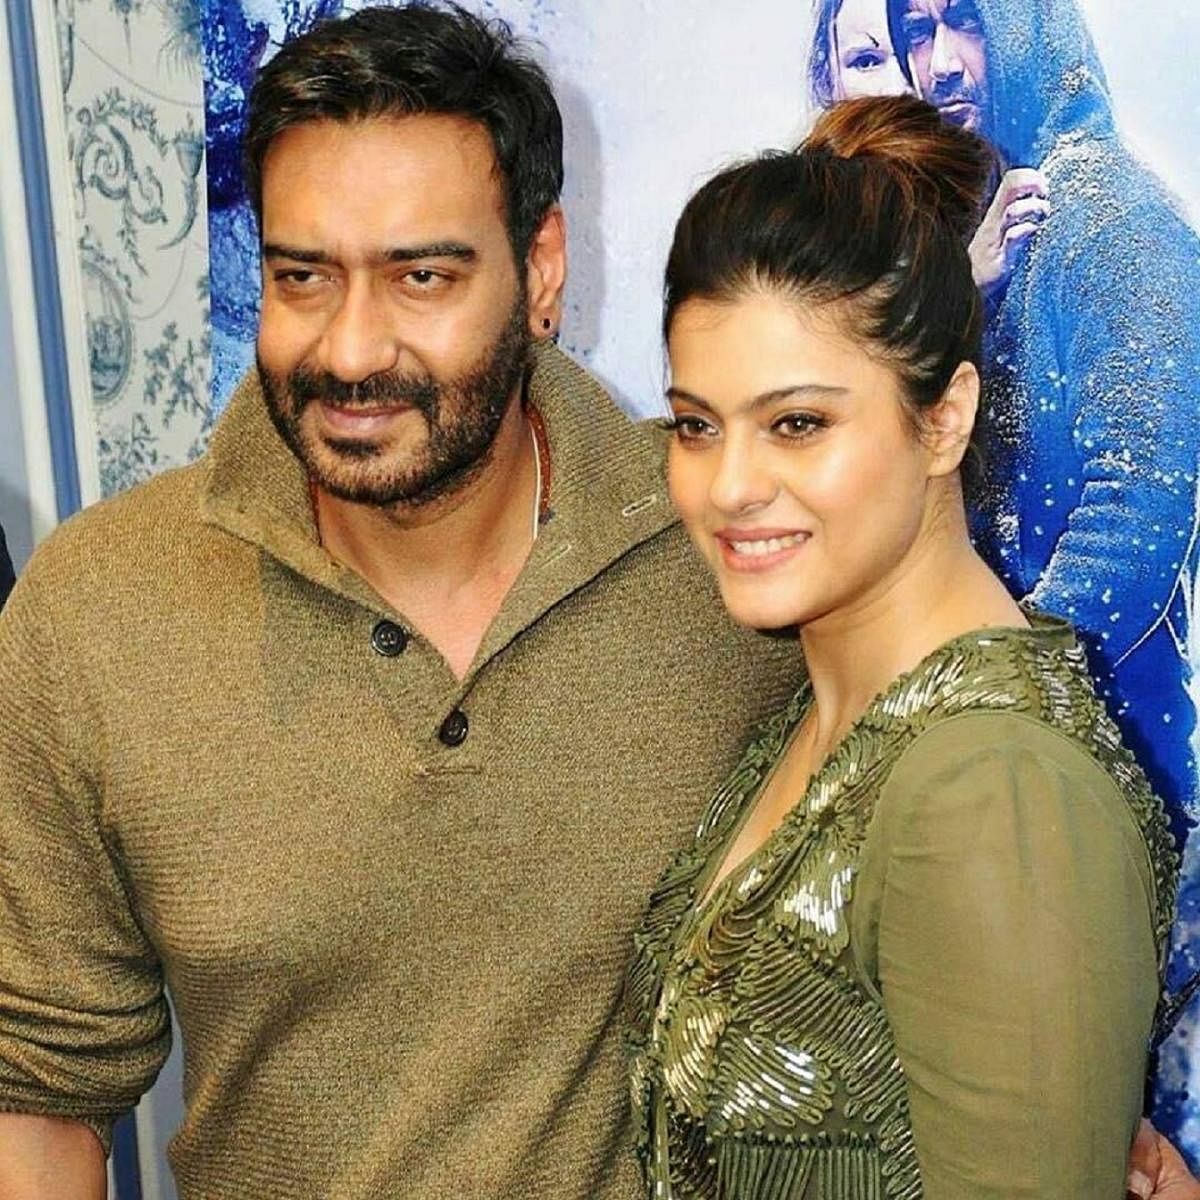 The actor said though they play the 'good cop-bad cop' routine in real life, Ajay has realised the importance of setting their kids - daughter Nysa and son Yug - straight.